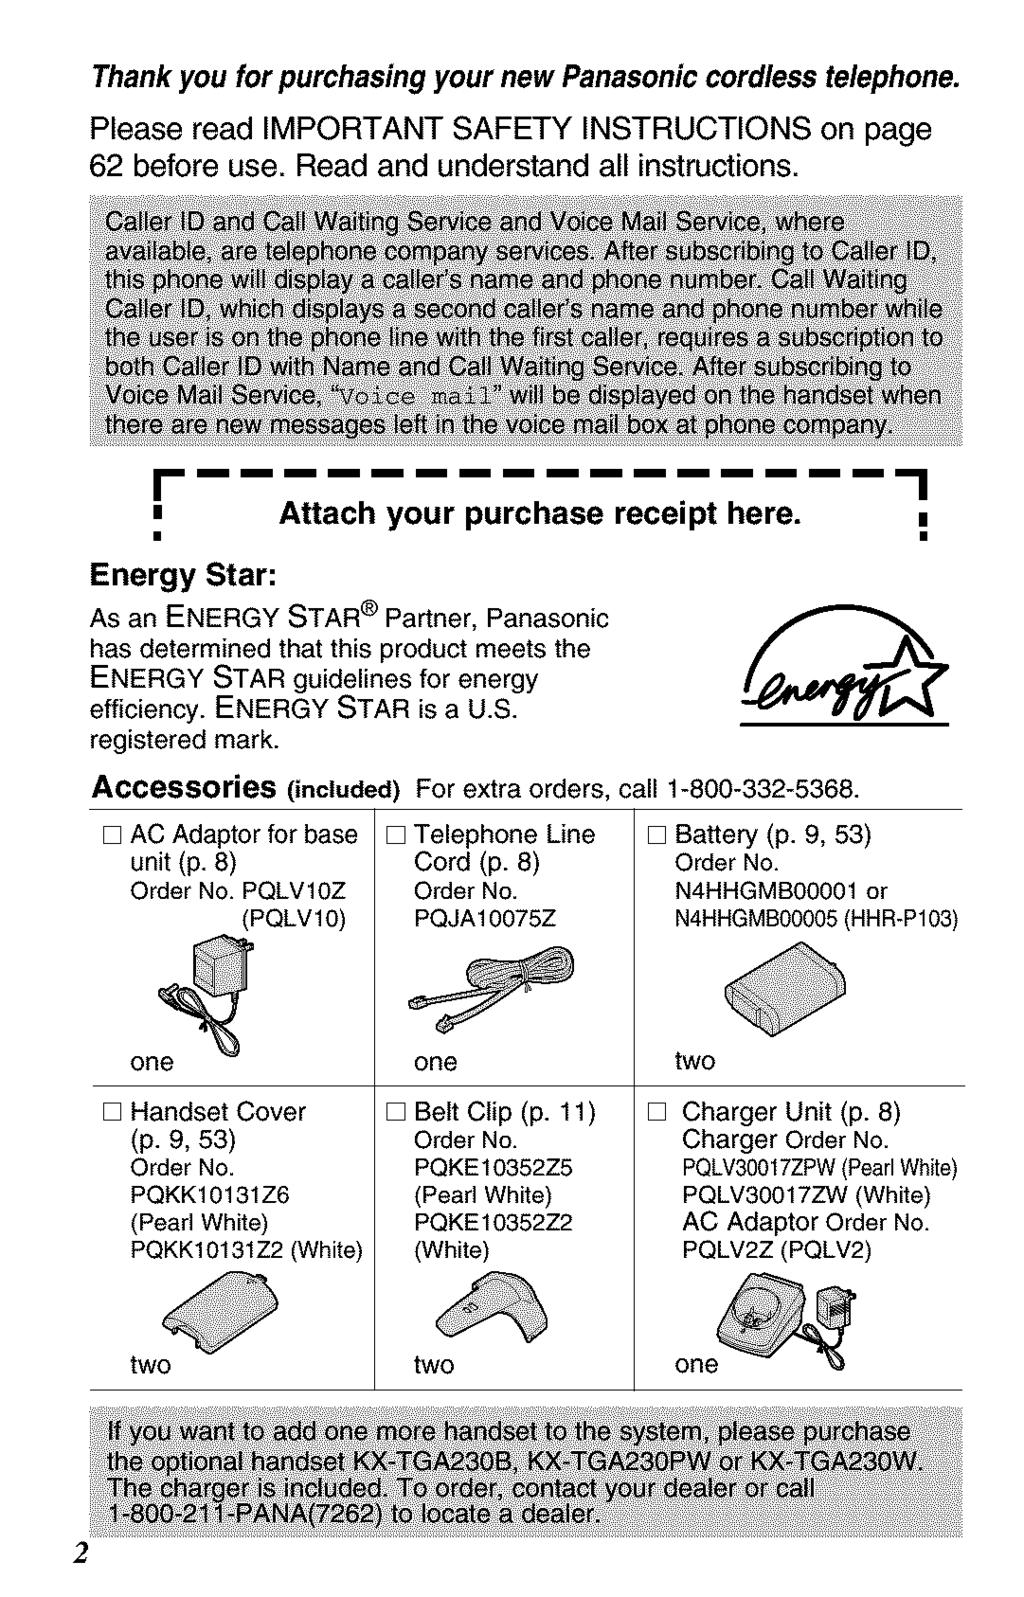 Thank you for purchasing your new Panasonic cordless telephone. Please read IMPORTANT SAFETY INSTRUCTIONS on page 62 before use. Read and understand all instructions.